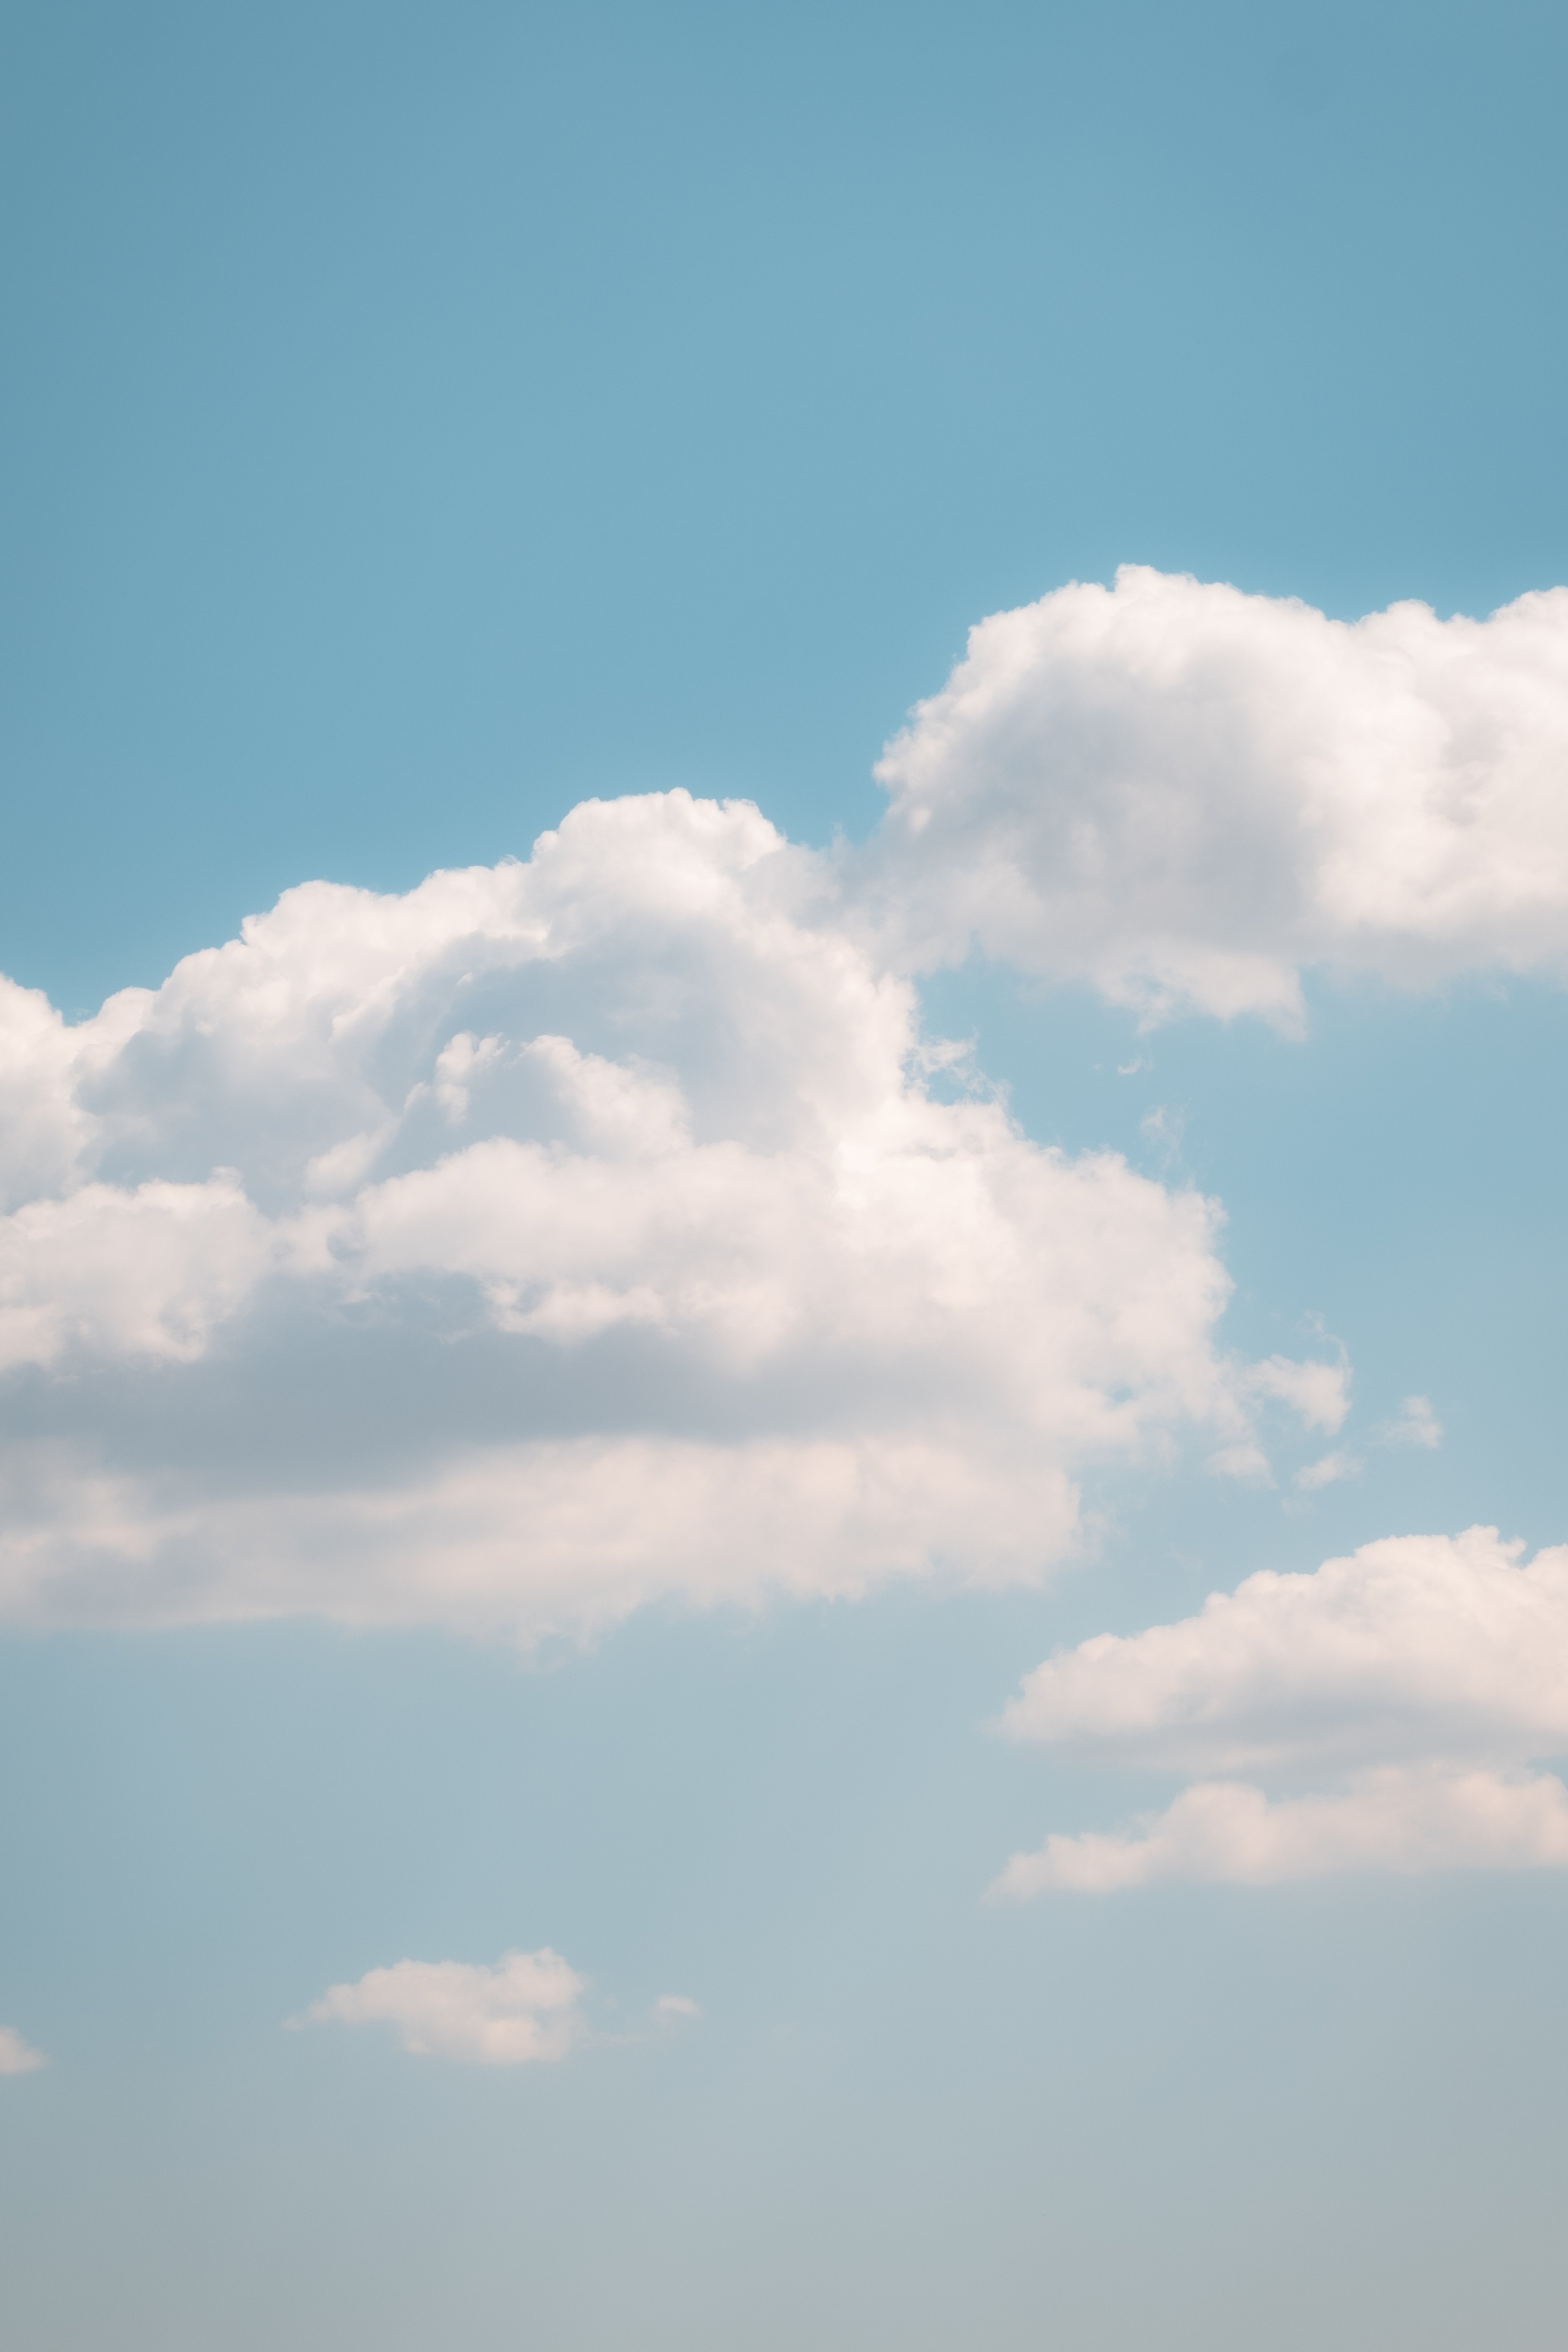 Browse Free HD Images of White Clouds In A Soft Blue Sky On Warm